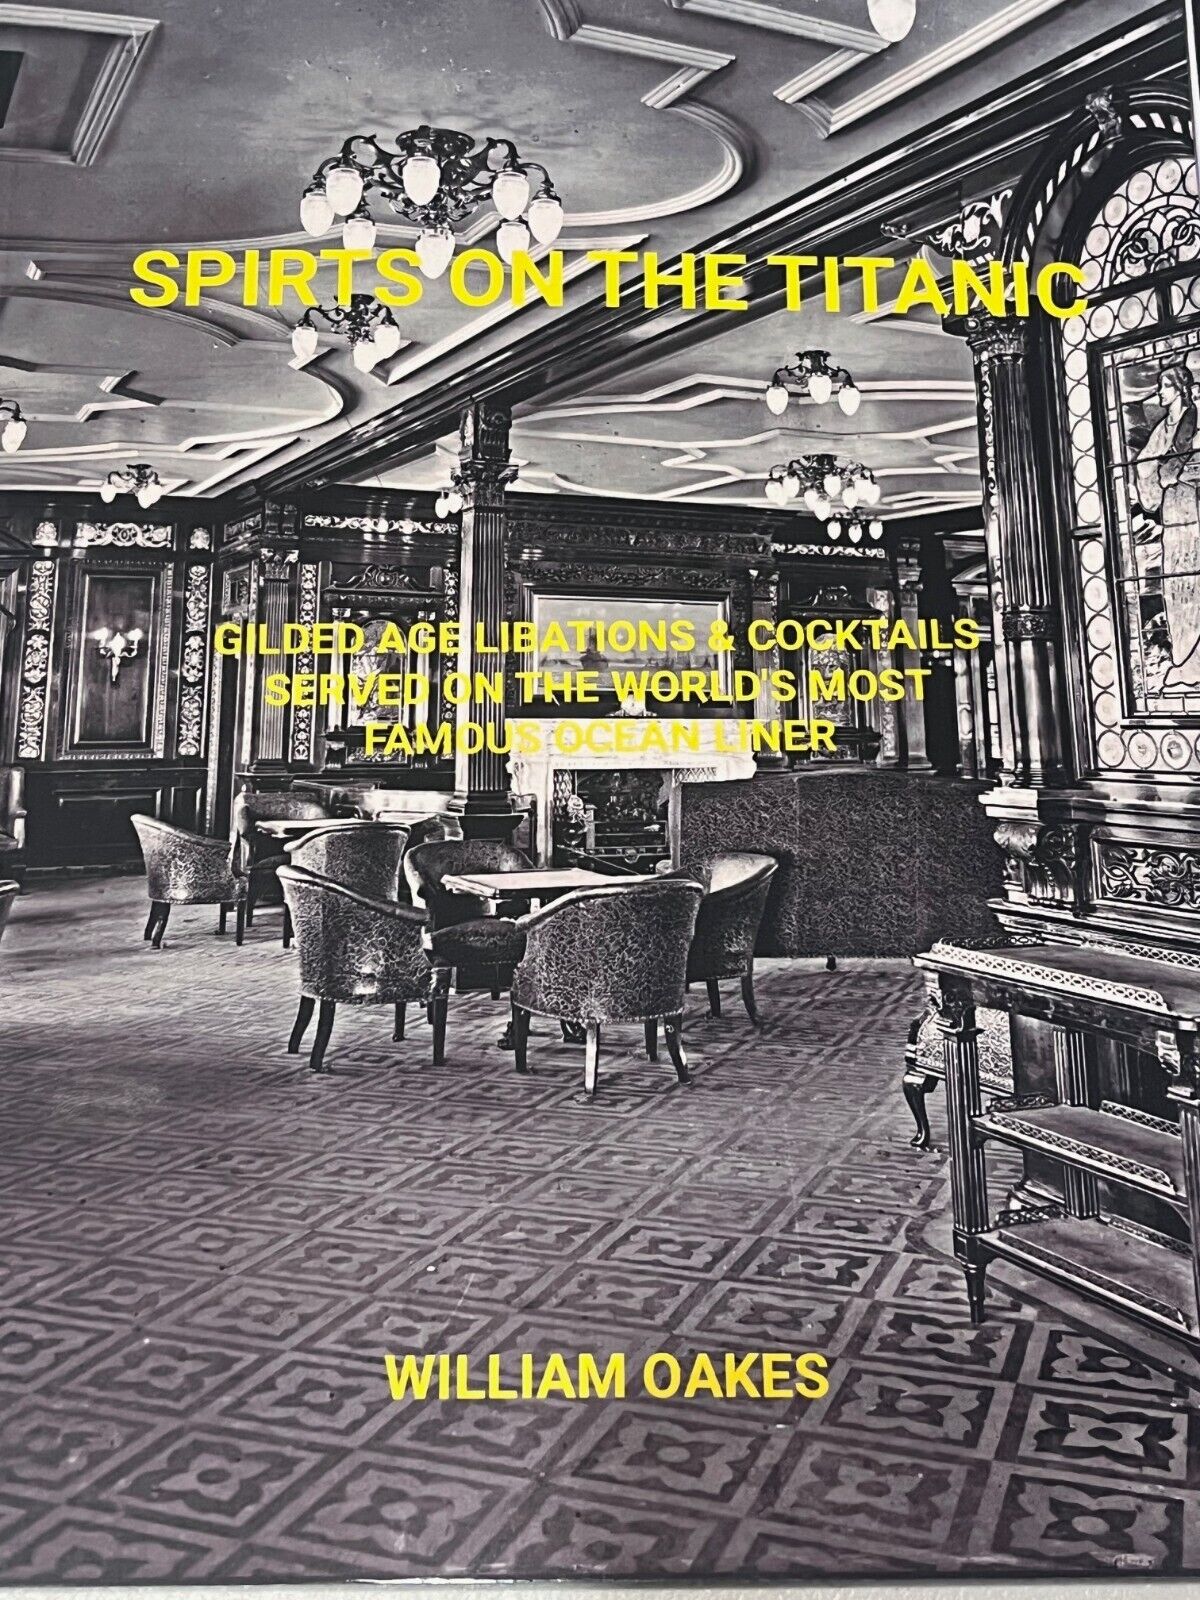 New RMS Titanic Book, Spirits On the Titanic: Gilded age Libations & Cocktails